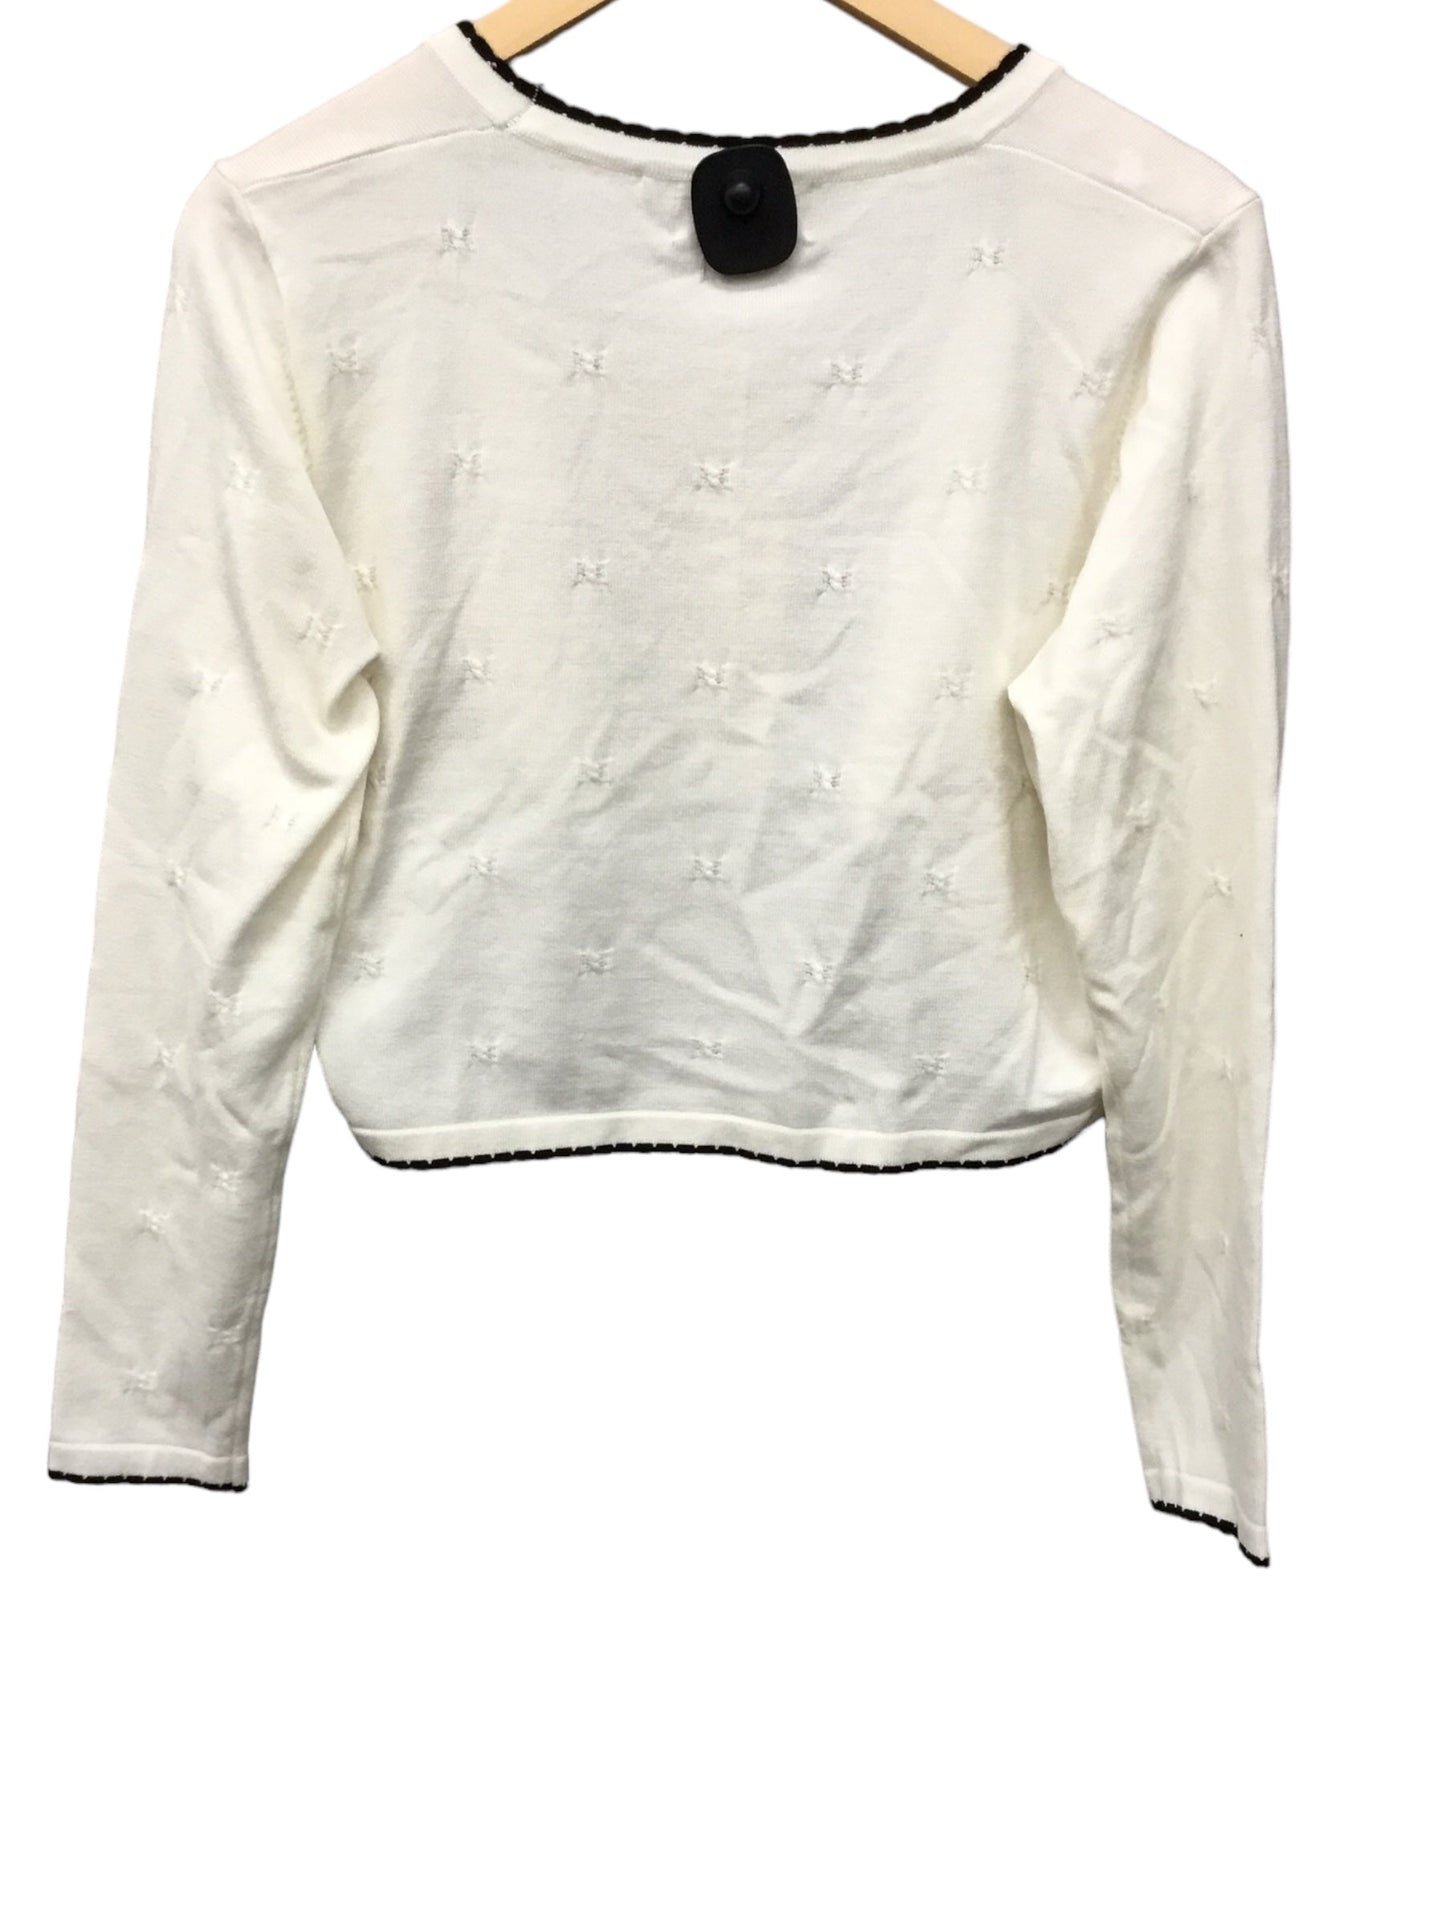 White Cardigan Clothes Mentor, Size Xl